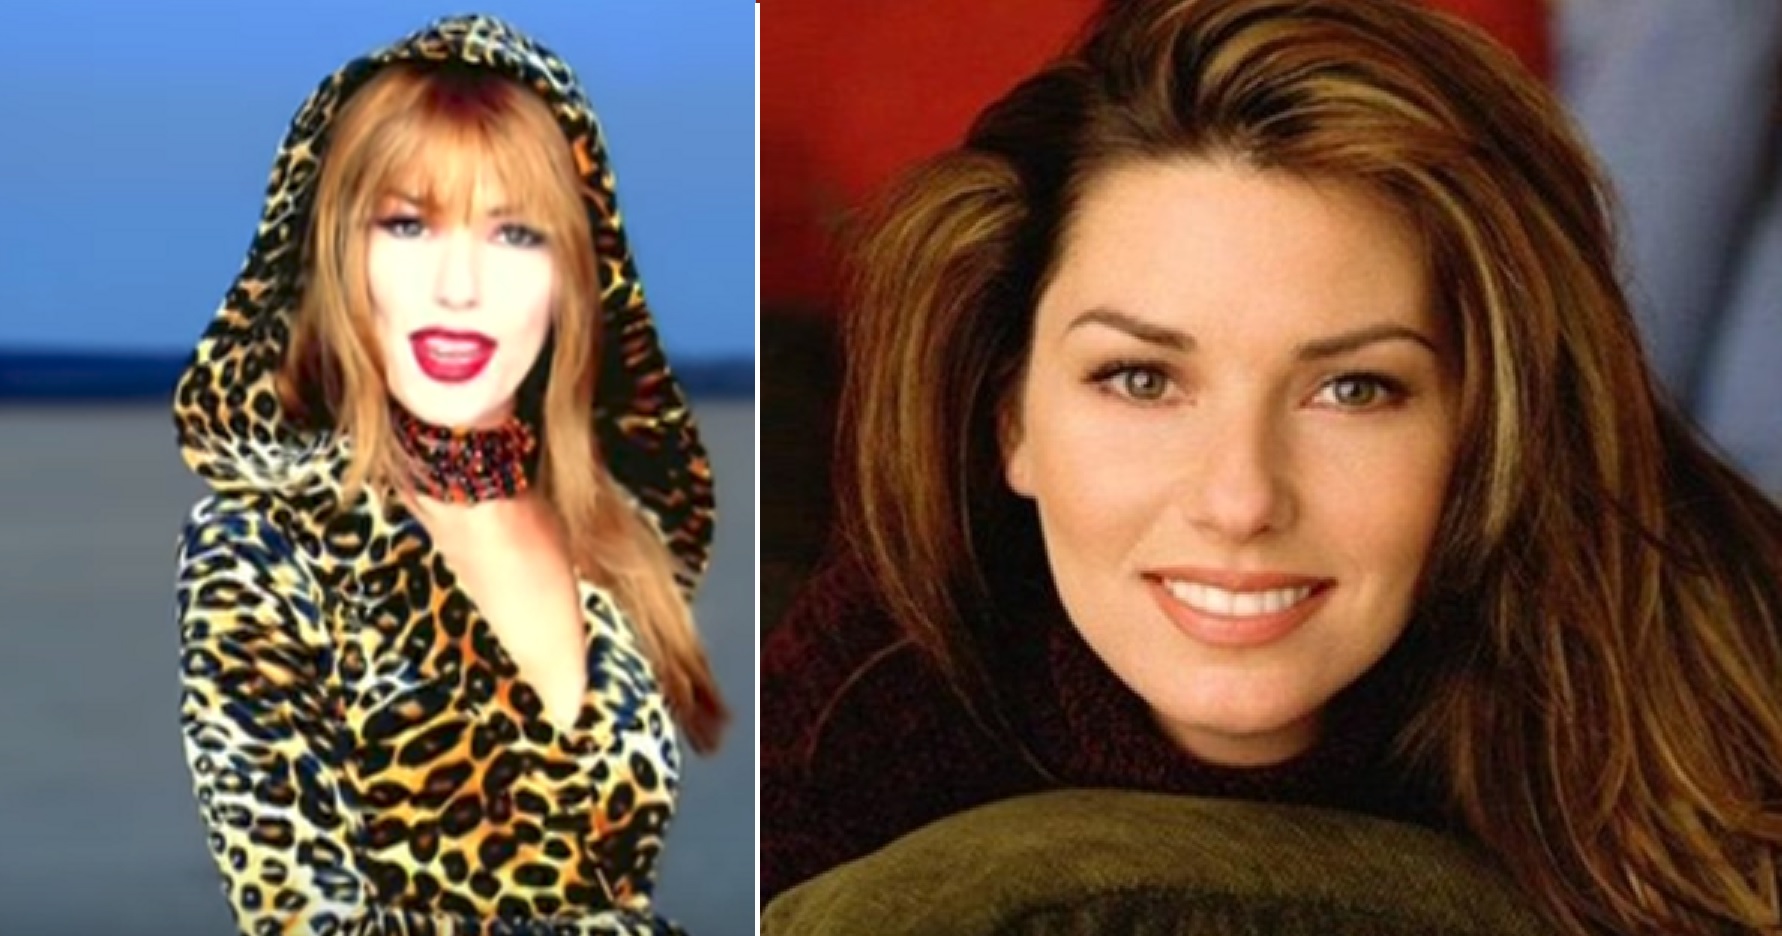 The Top 10 Best Songs Of Shania Twain – The Timeless Queen of Country/Pop